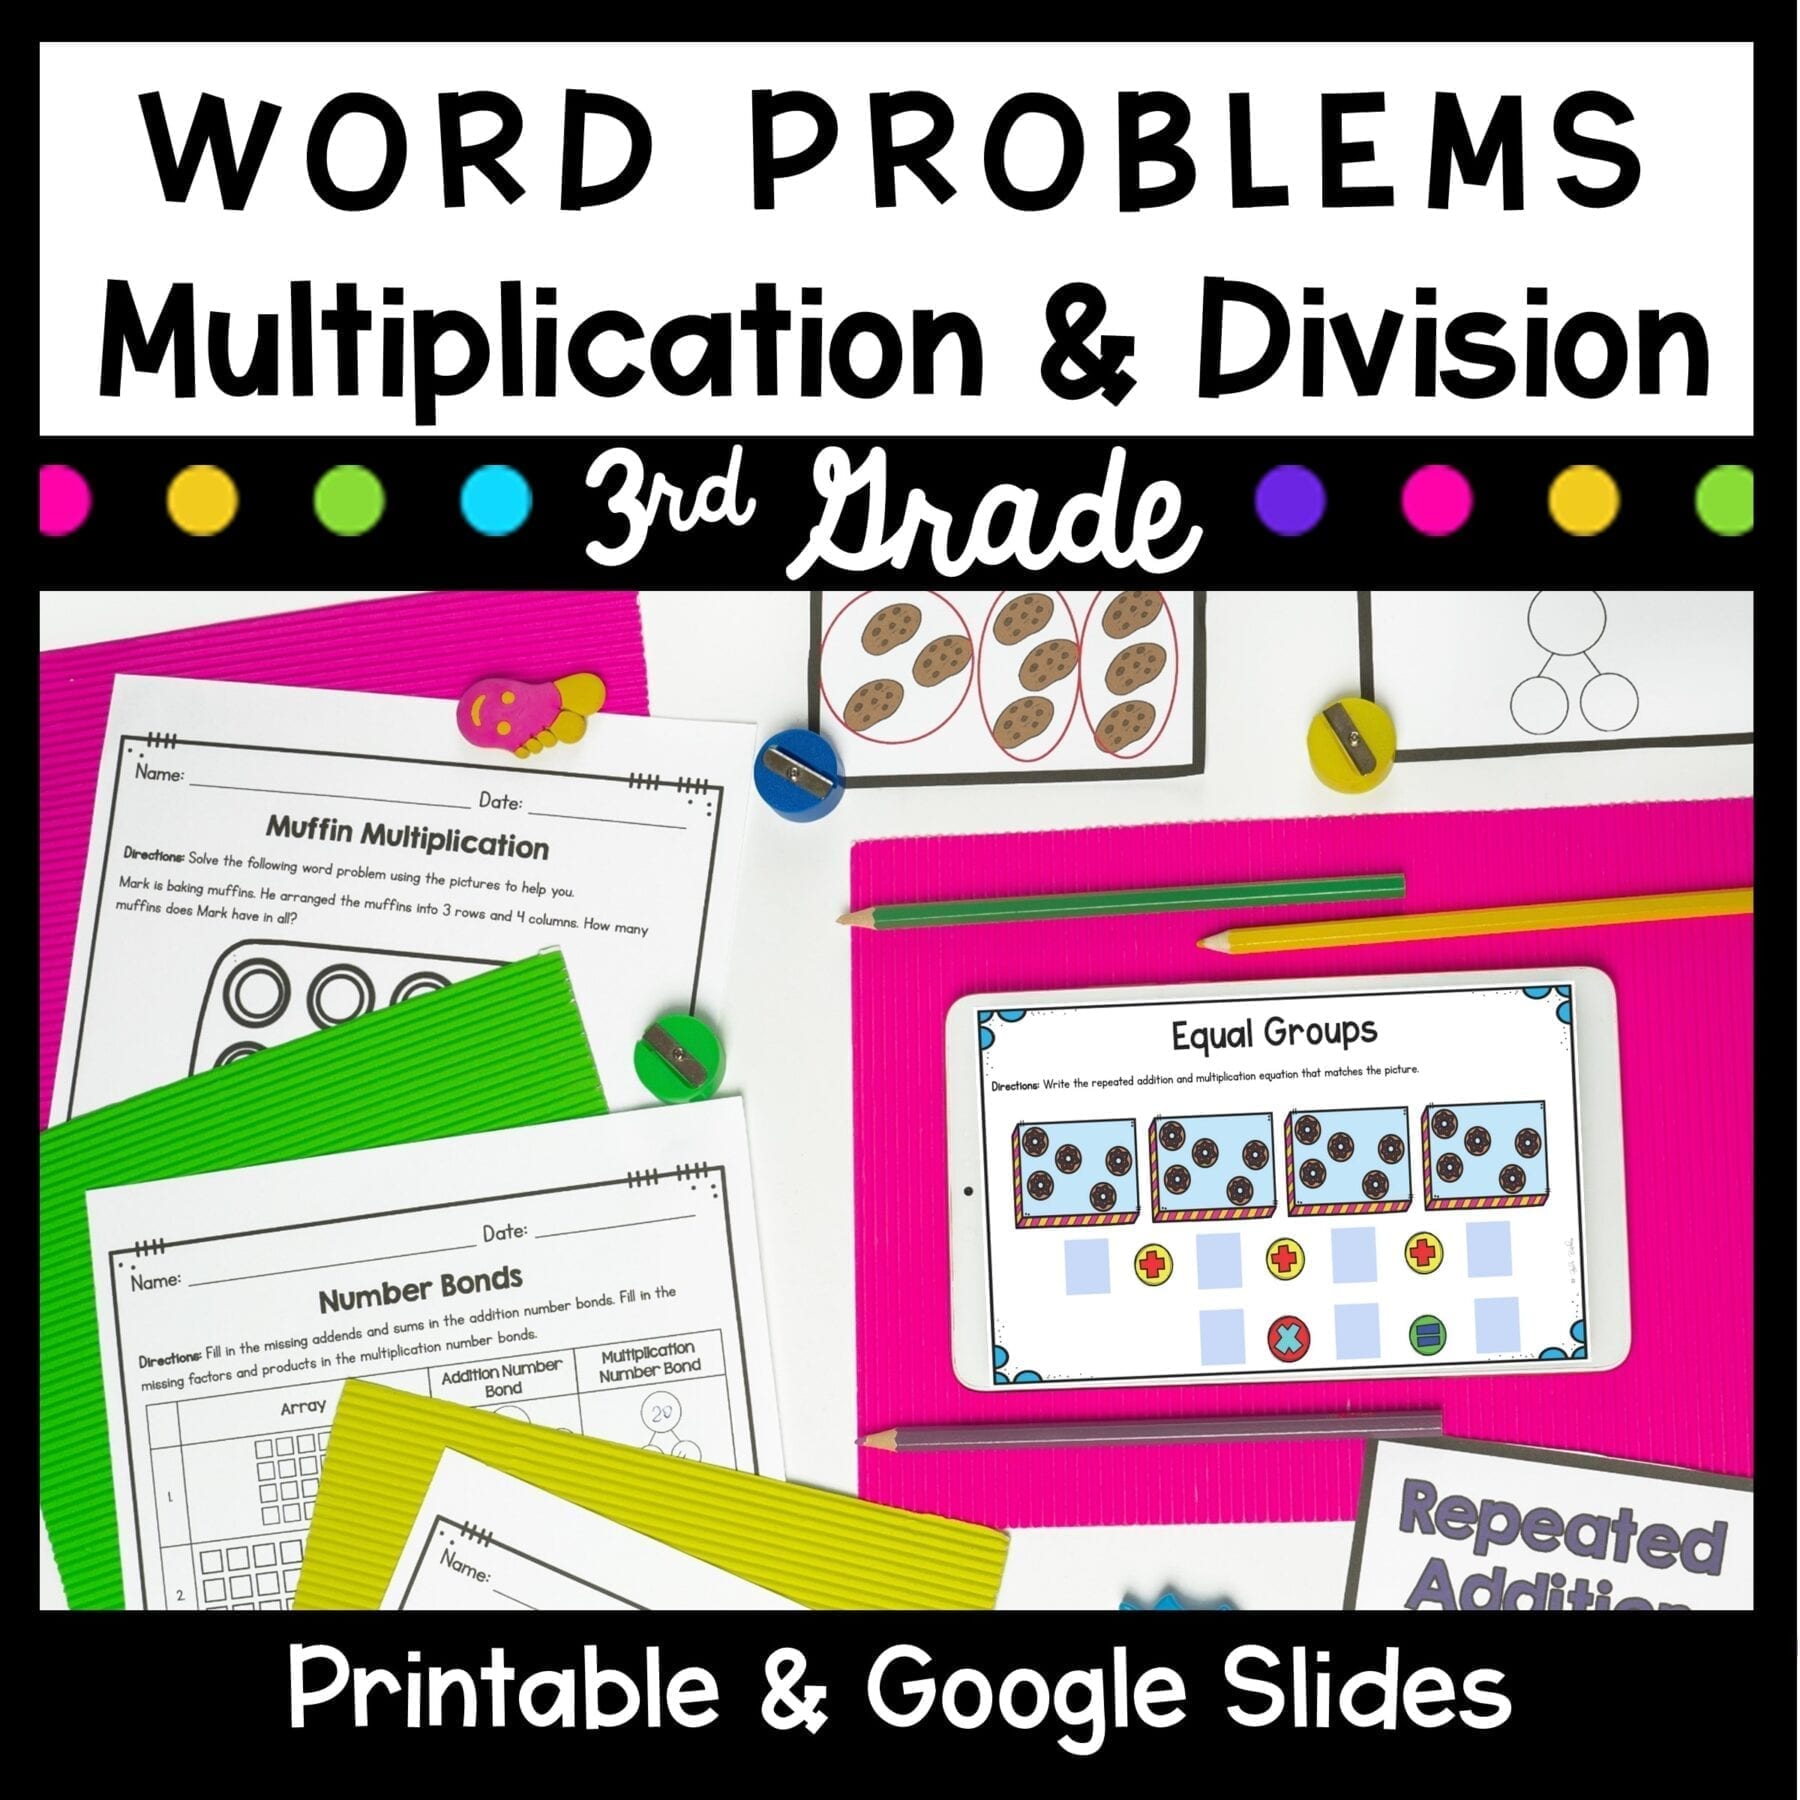 multiplication-and-division-word-problems-anchor-chart-mastering-multi-step-word-problems